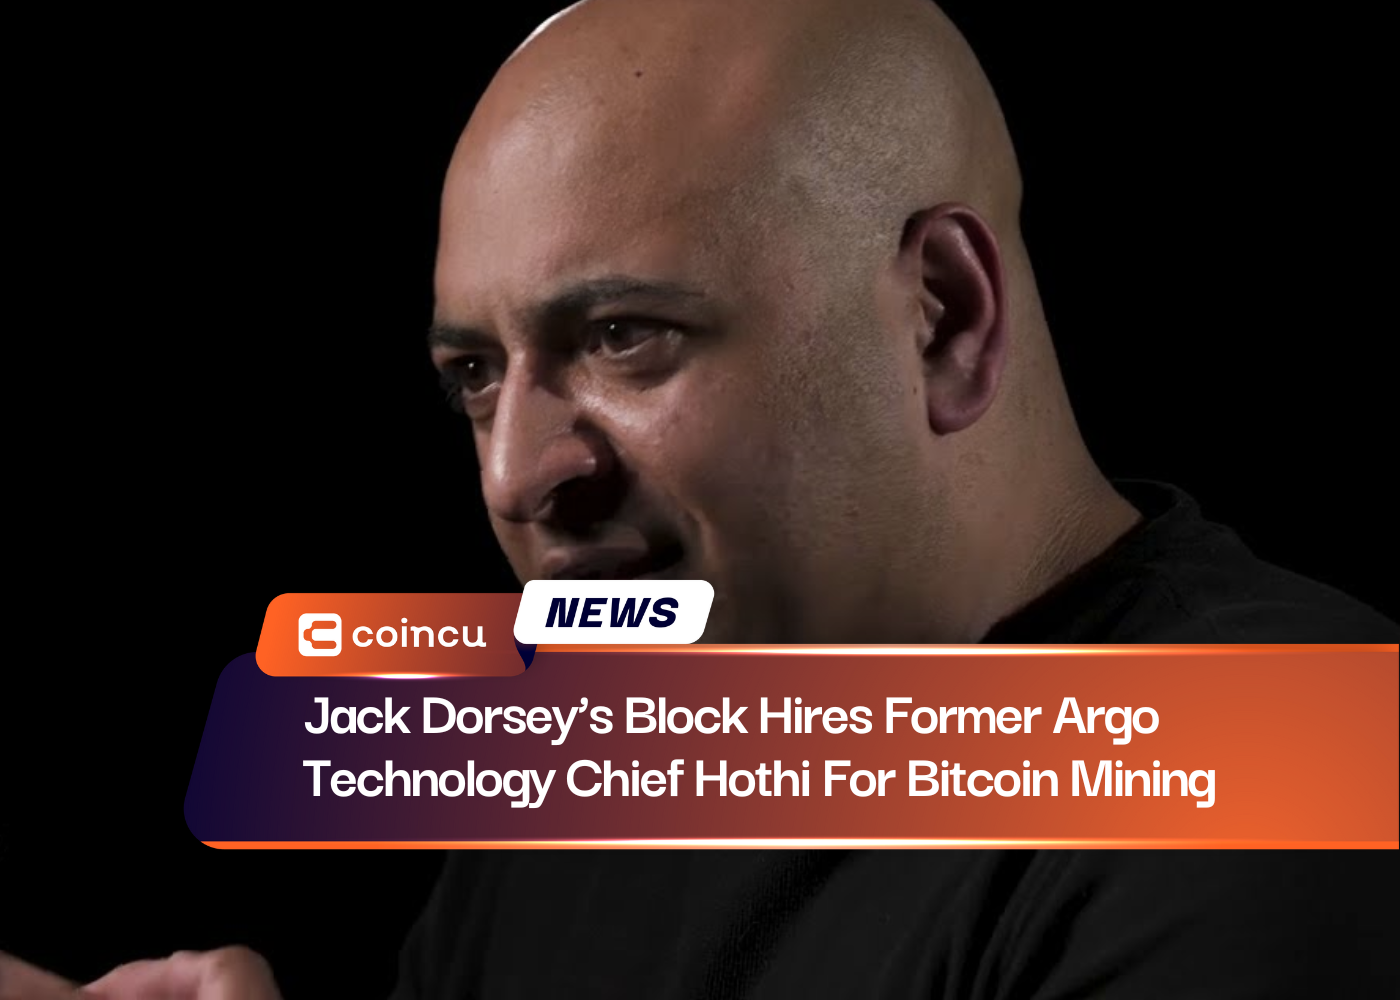 Jack Dorsey’s Block Hires Former Argo Technology Chief Hothi For Bitcoin Mining